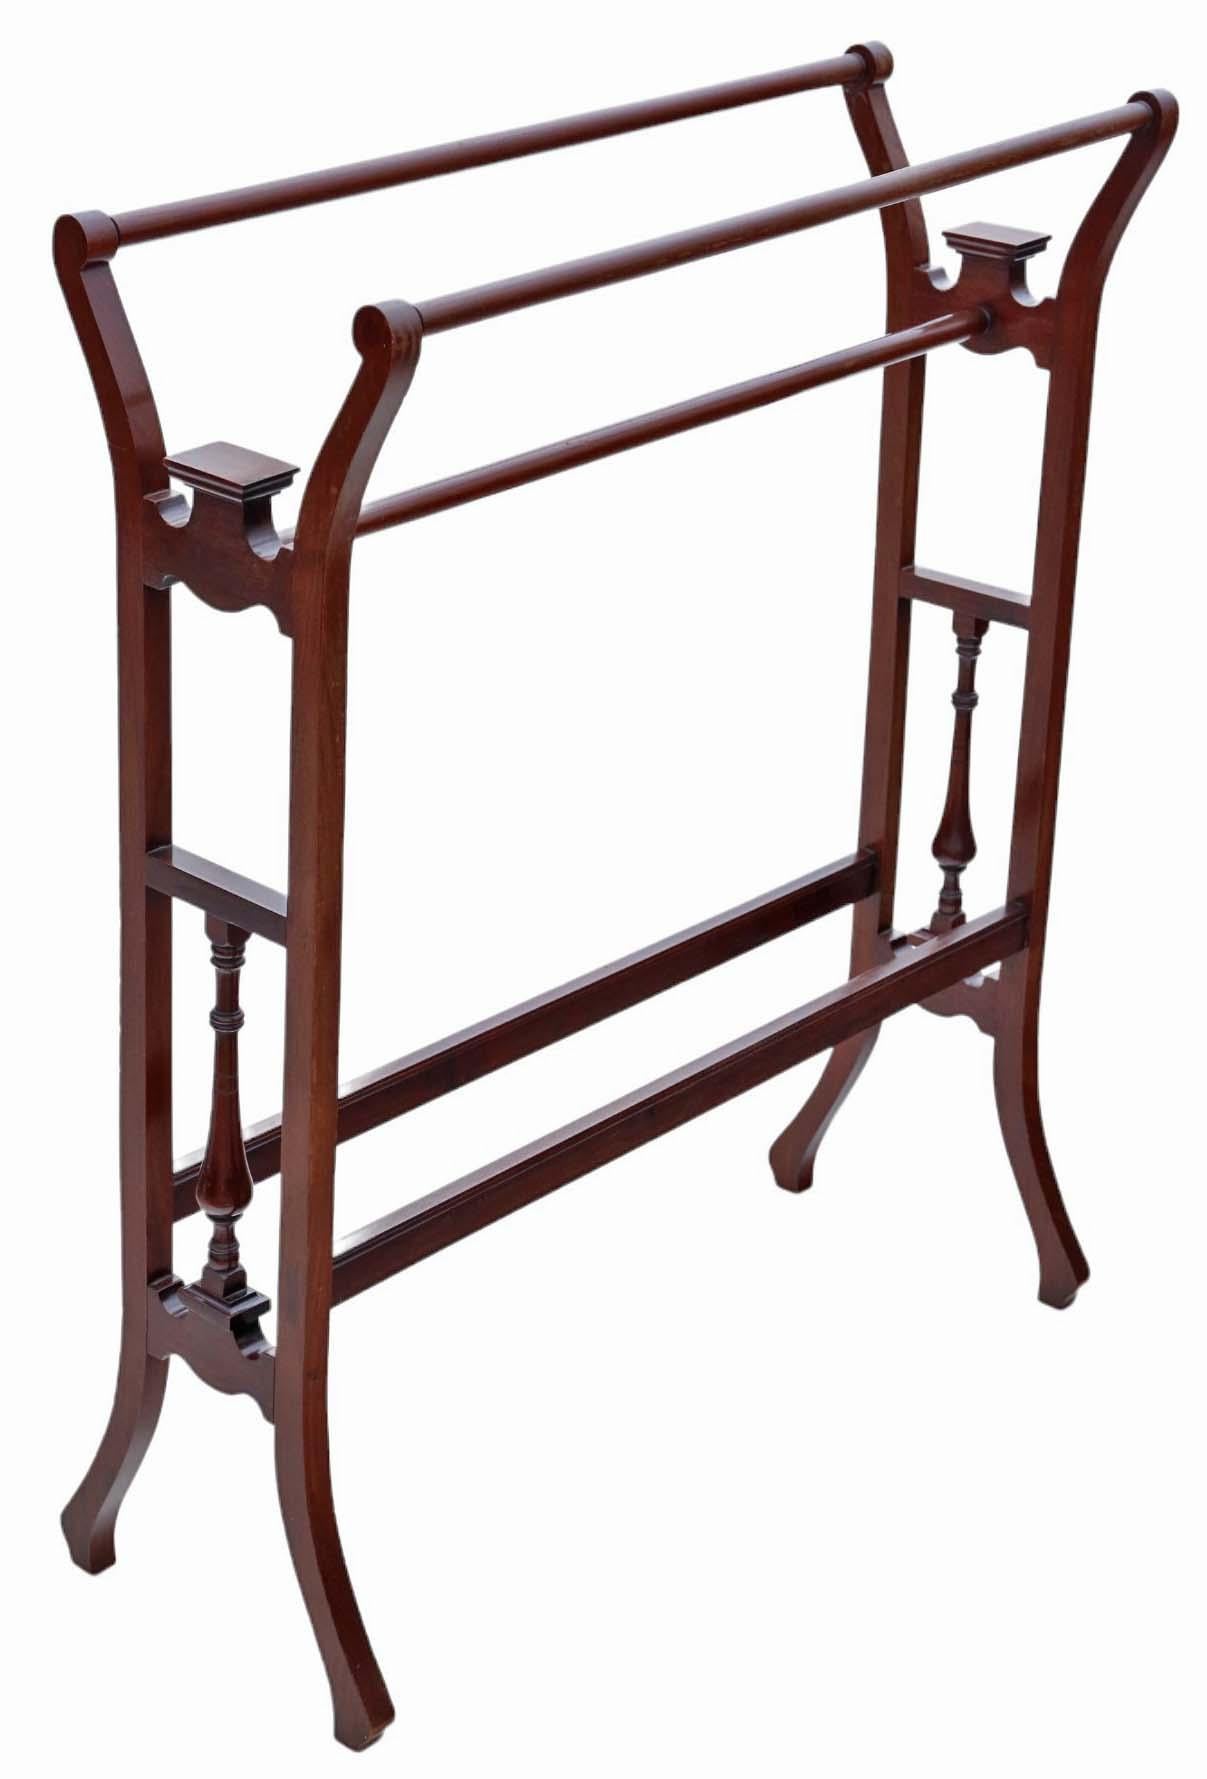 Antique Victorian mahogany Towel Rail Stand - Quality Art Nouveau C1900 In Good Condition For Sale In Wisbech, Cambridgeshire